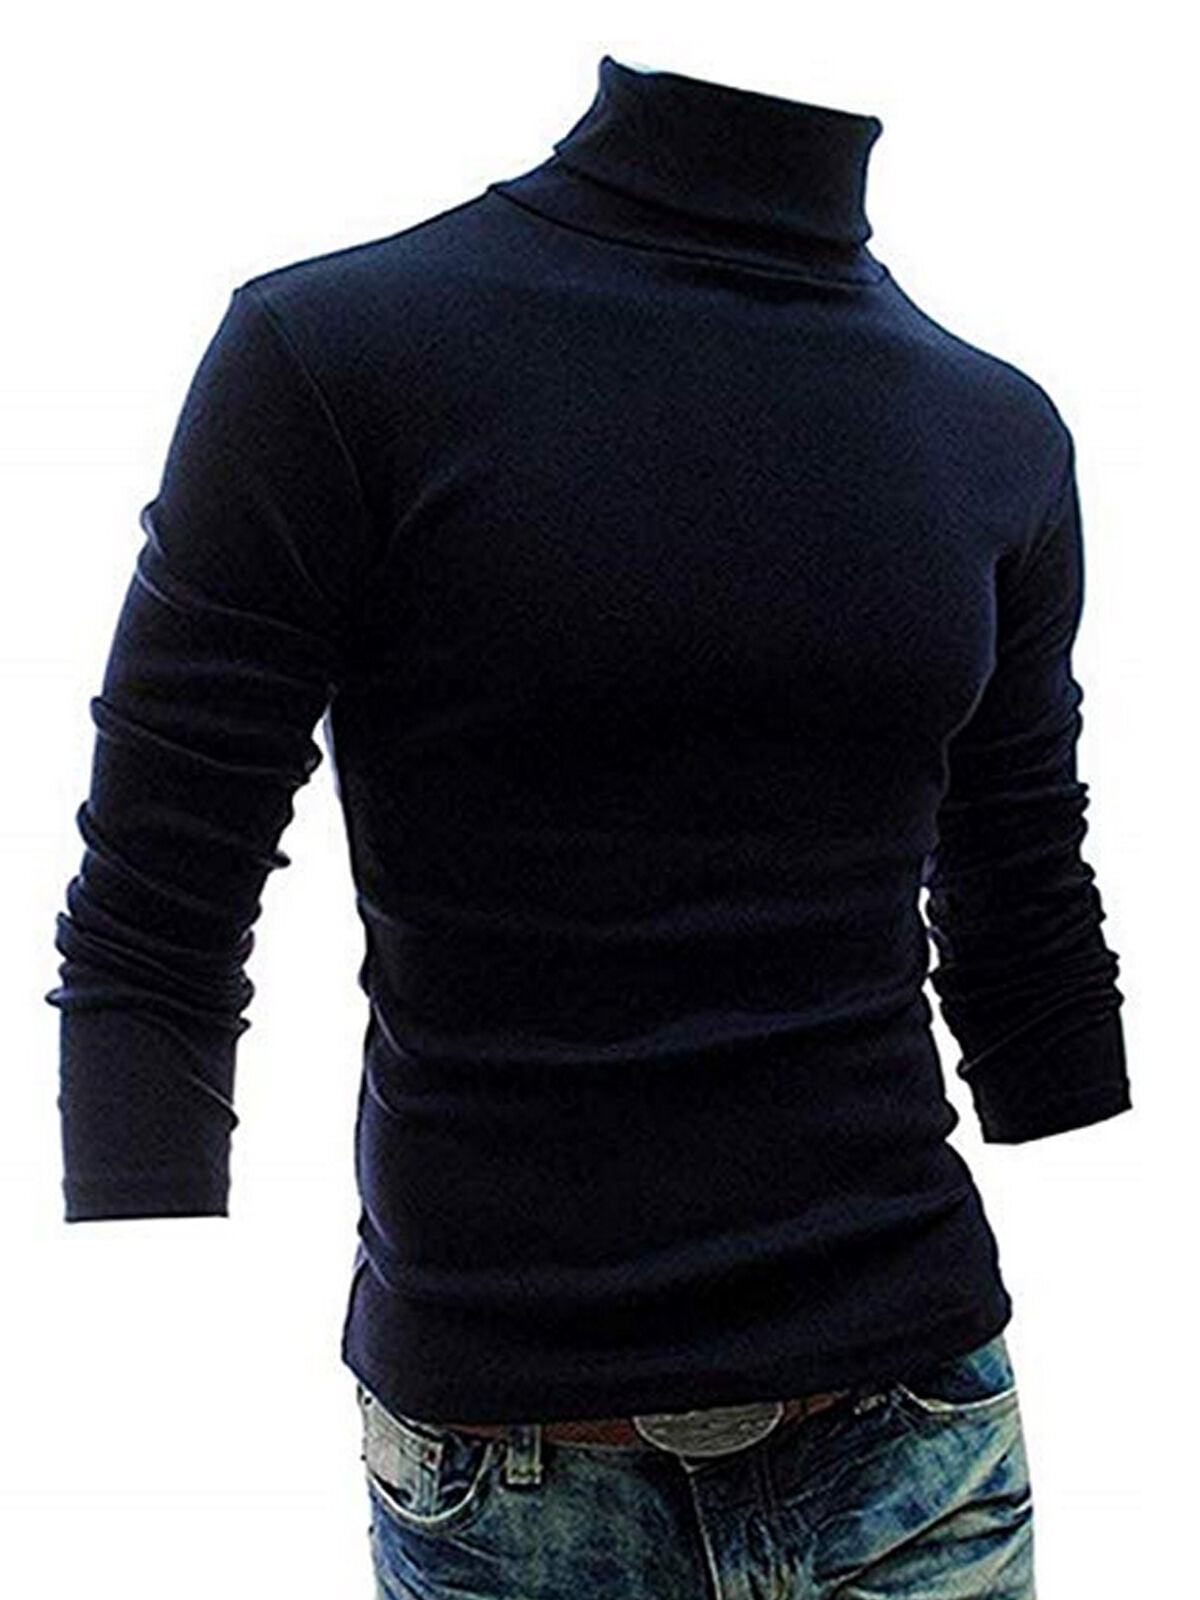 kaifongfu Mens Turtleneck Sweater Autumn Winter Pure Color Long Sleeve Pullover Blouse Top